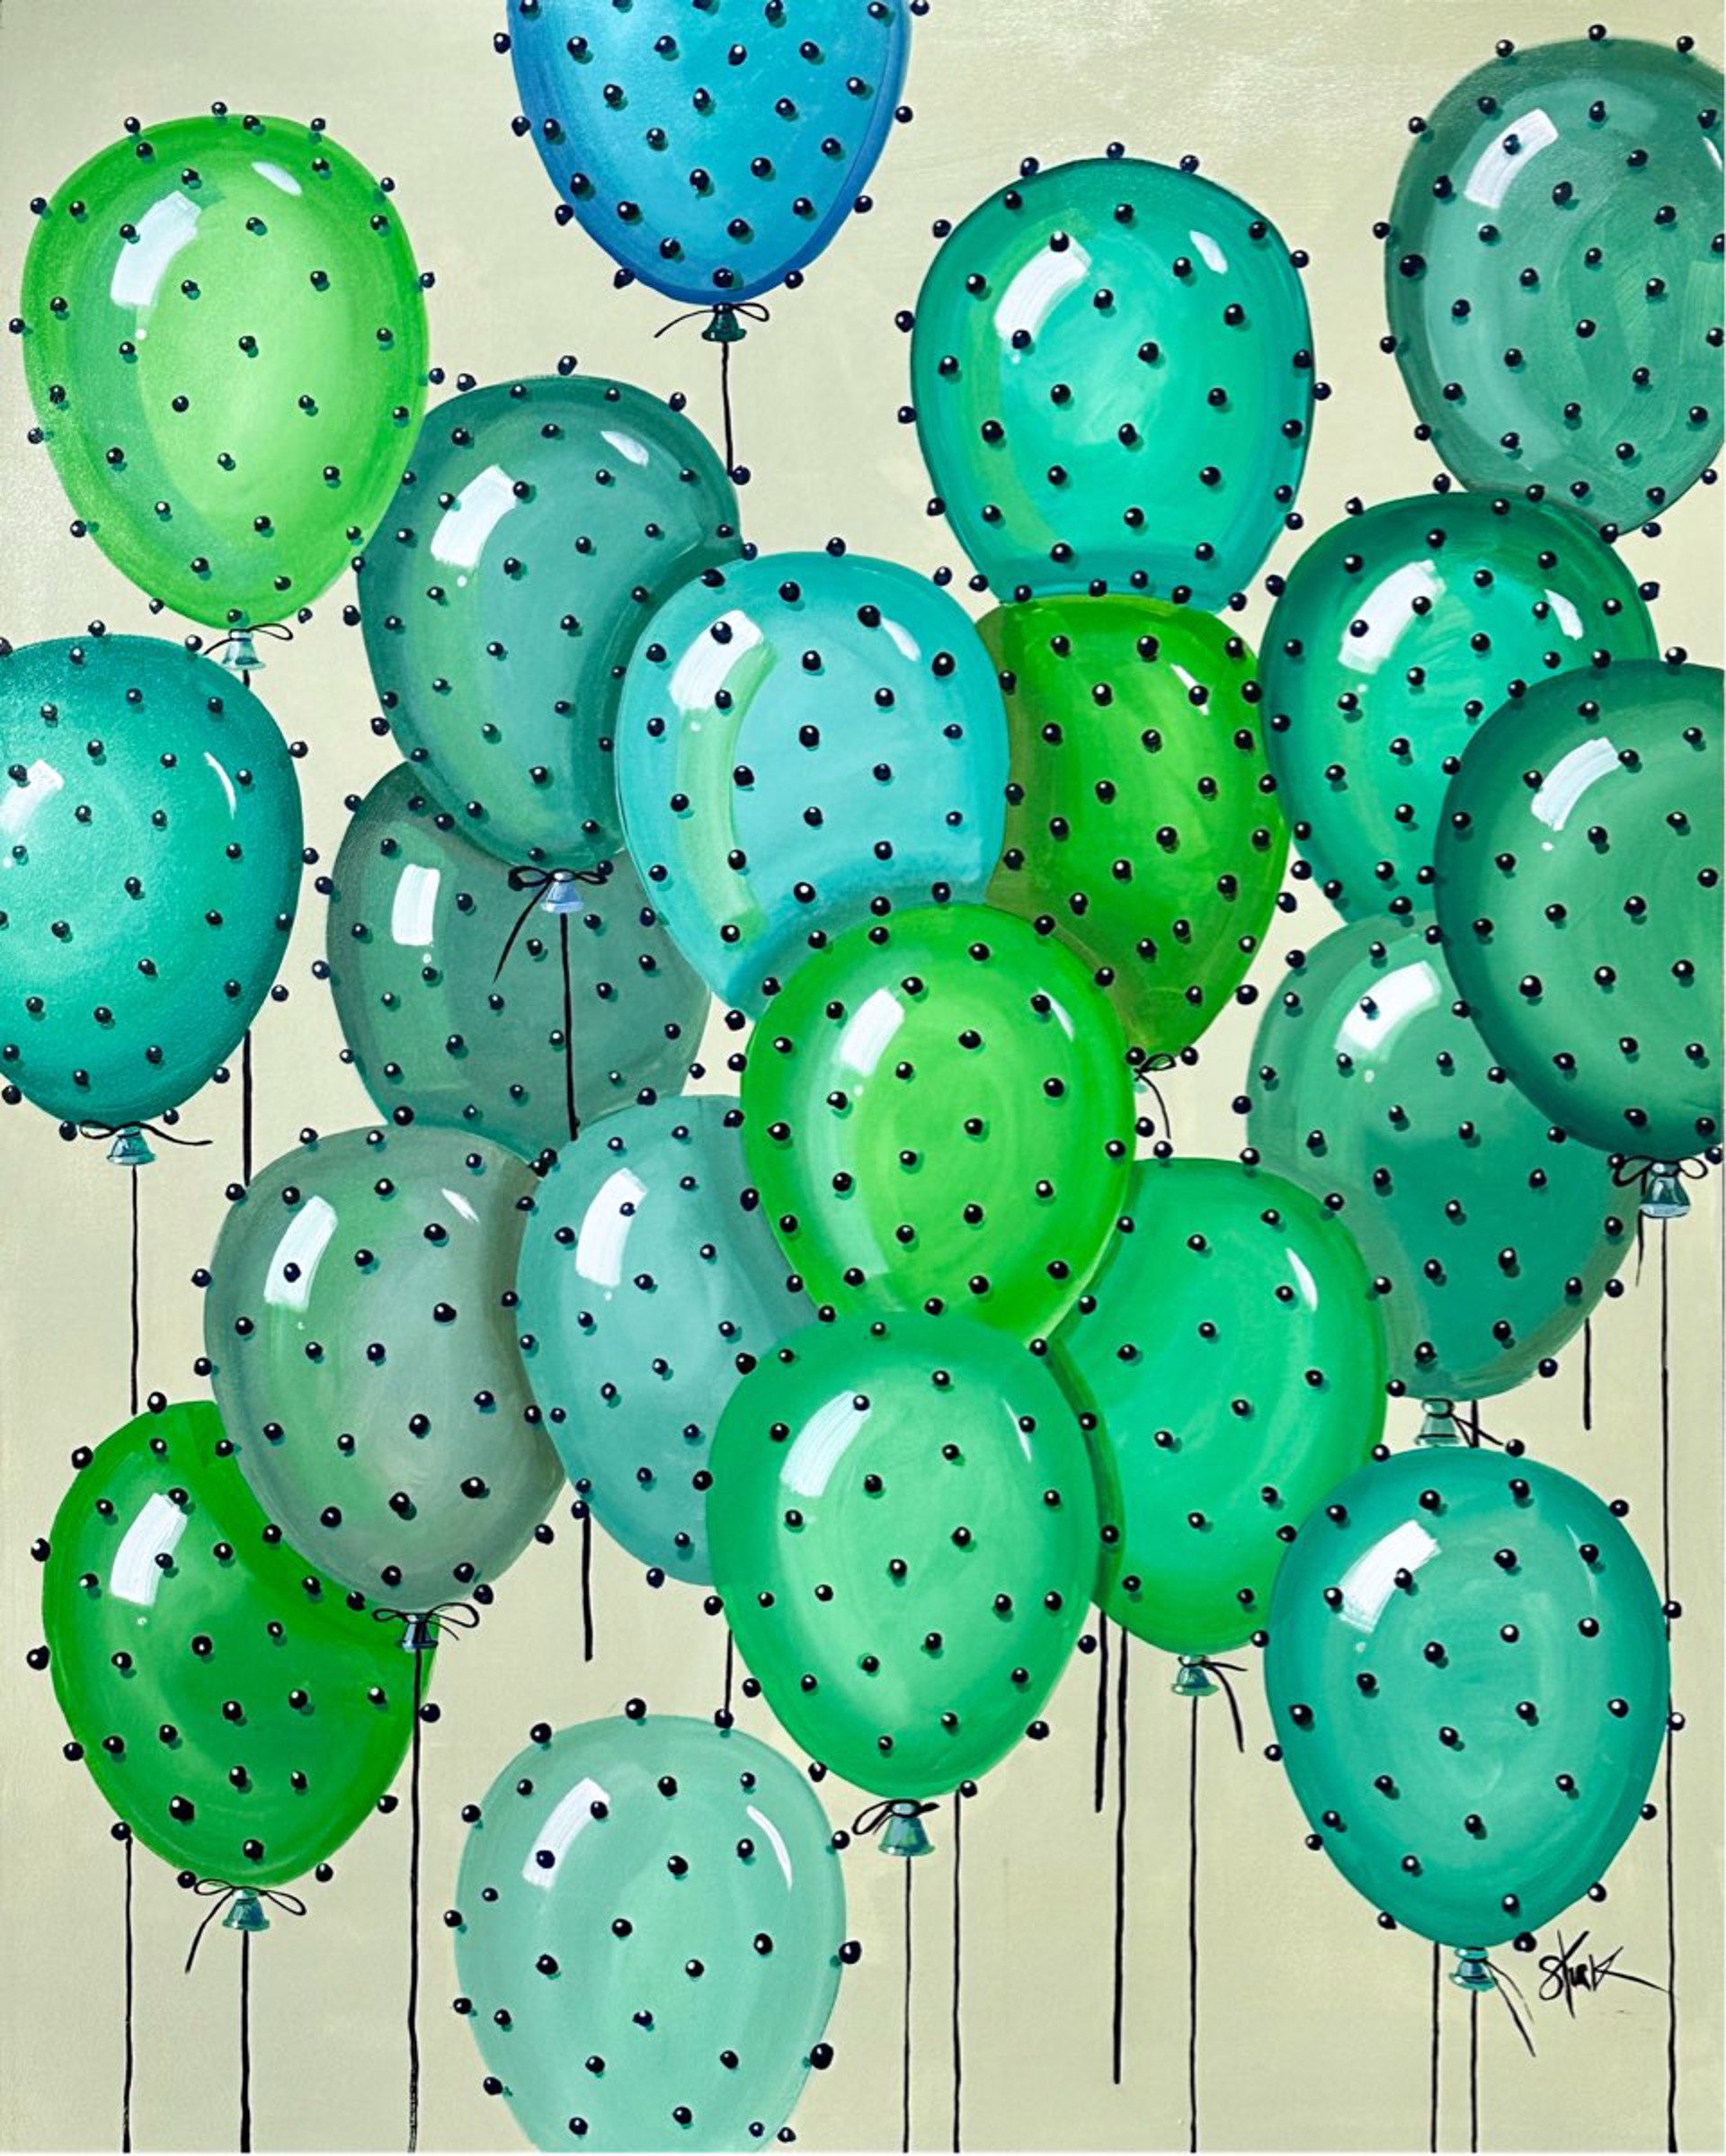 Prickly Balloons by Lorenzo Stirk